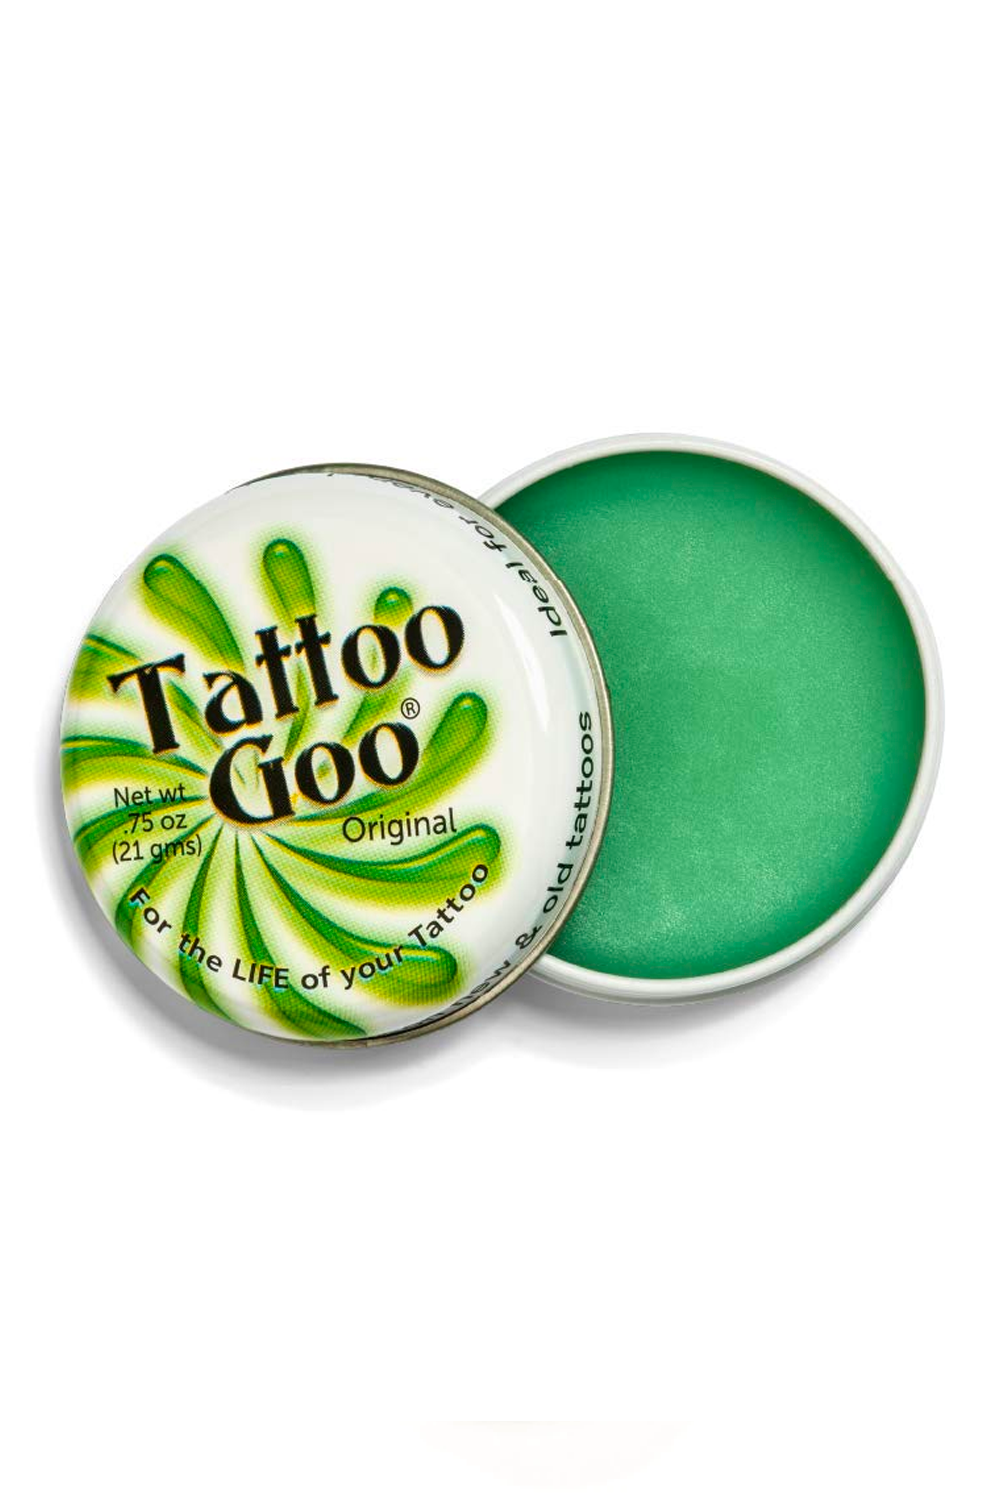 Tattoo Goo Balm Tattoo Aftercare Beauty  Personal Care Bath  Body Body  Care on Carousell